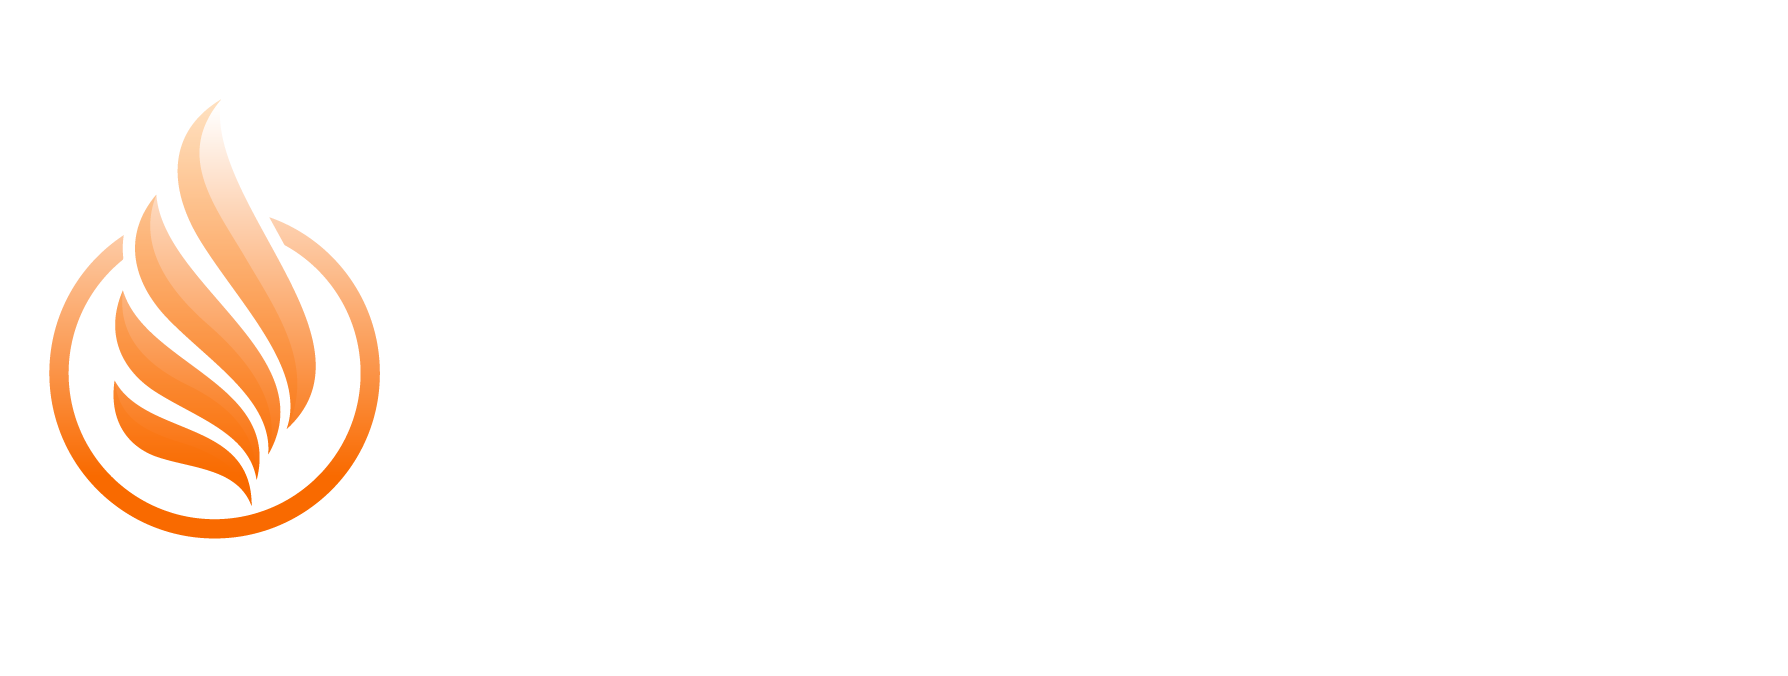 The Tournament Series are here!